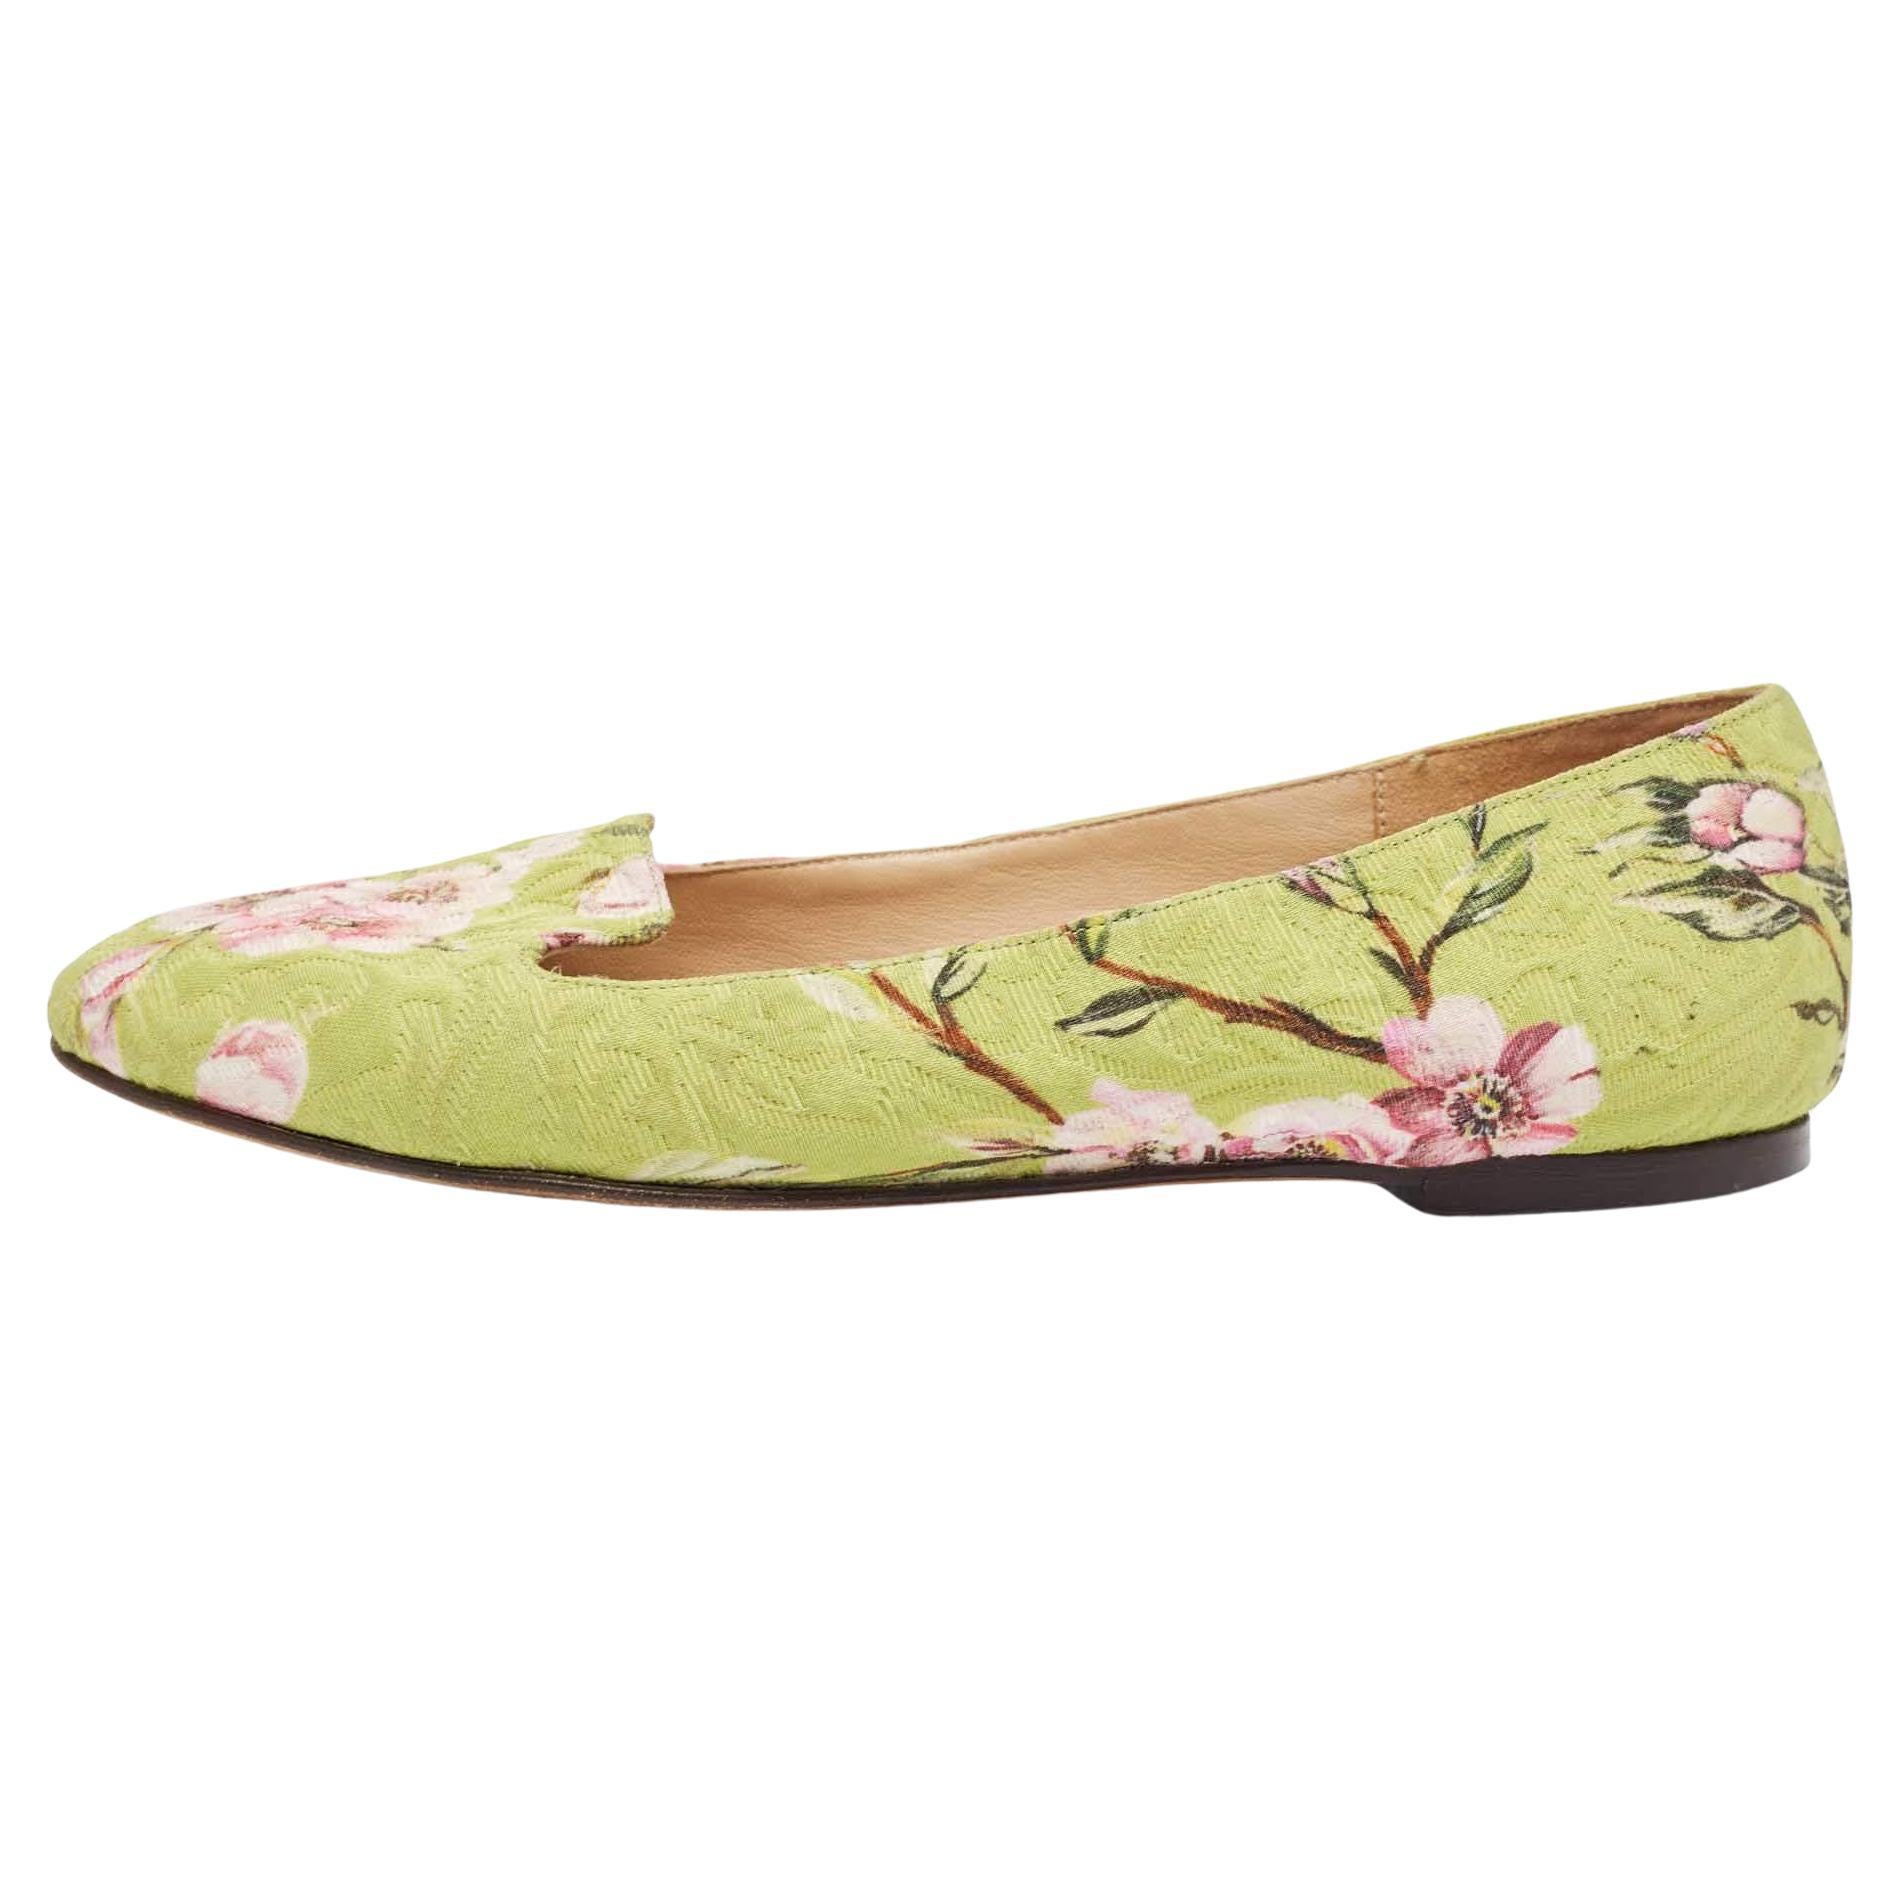 Dolce & Gabbana Multicolor Floral Print Brocade Flat Smoking Slippers Size 36 For Sale